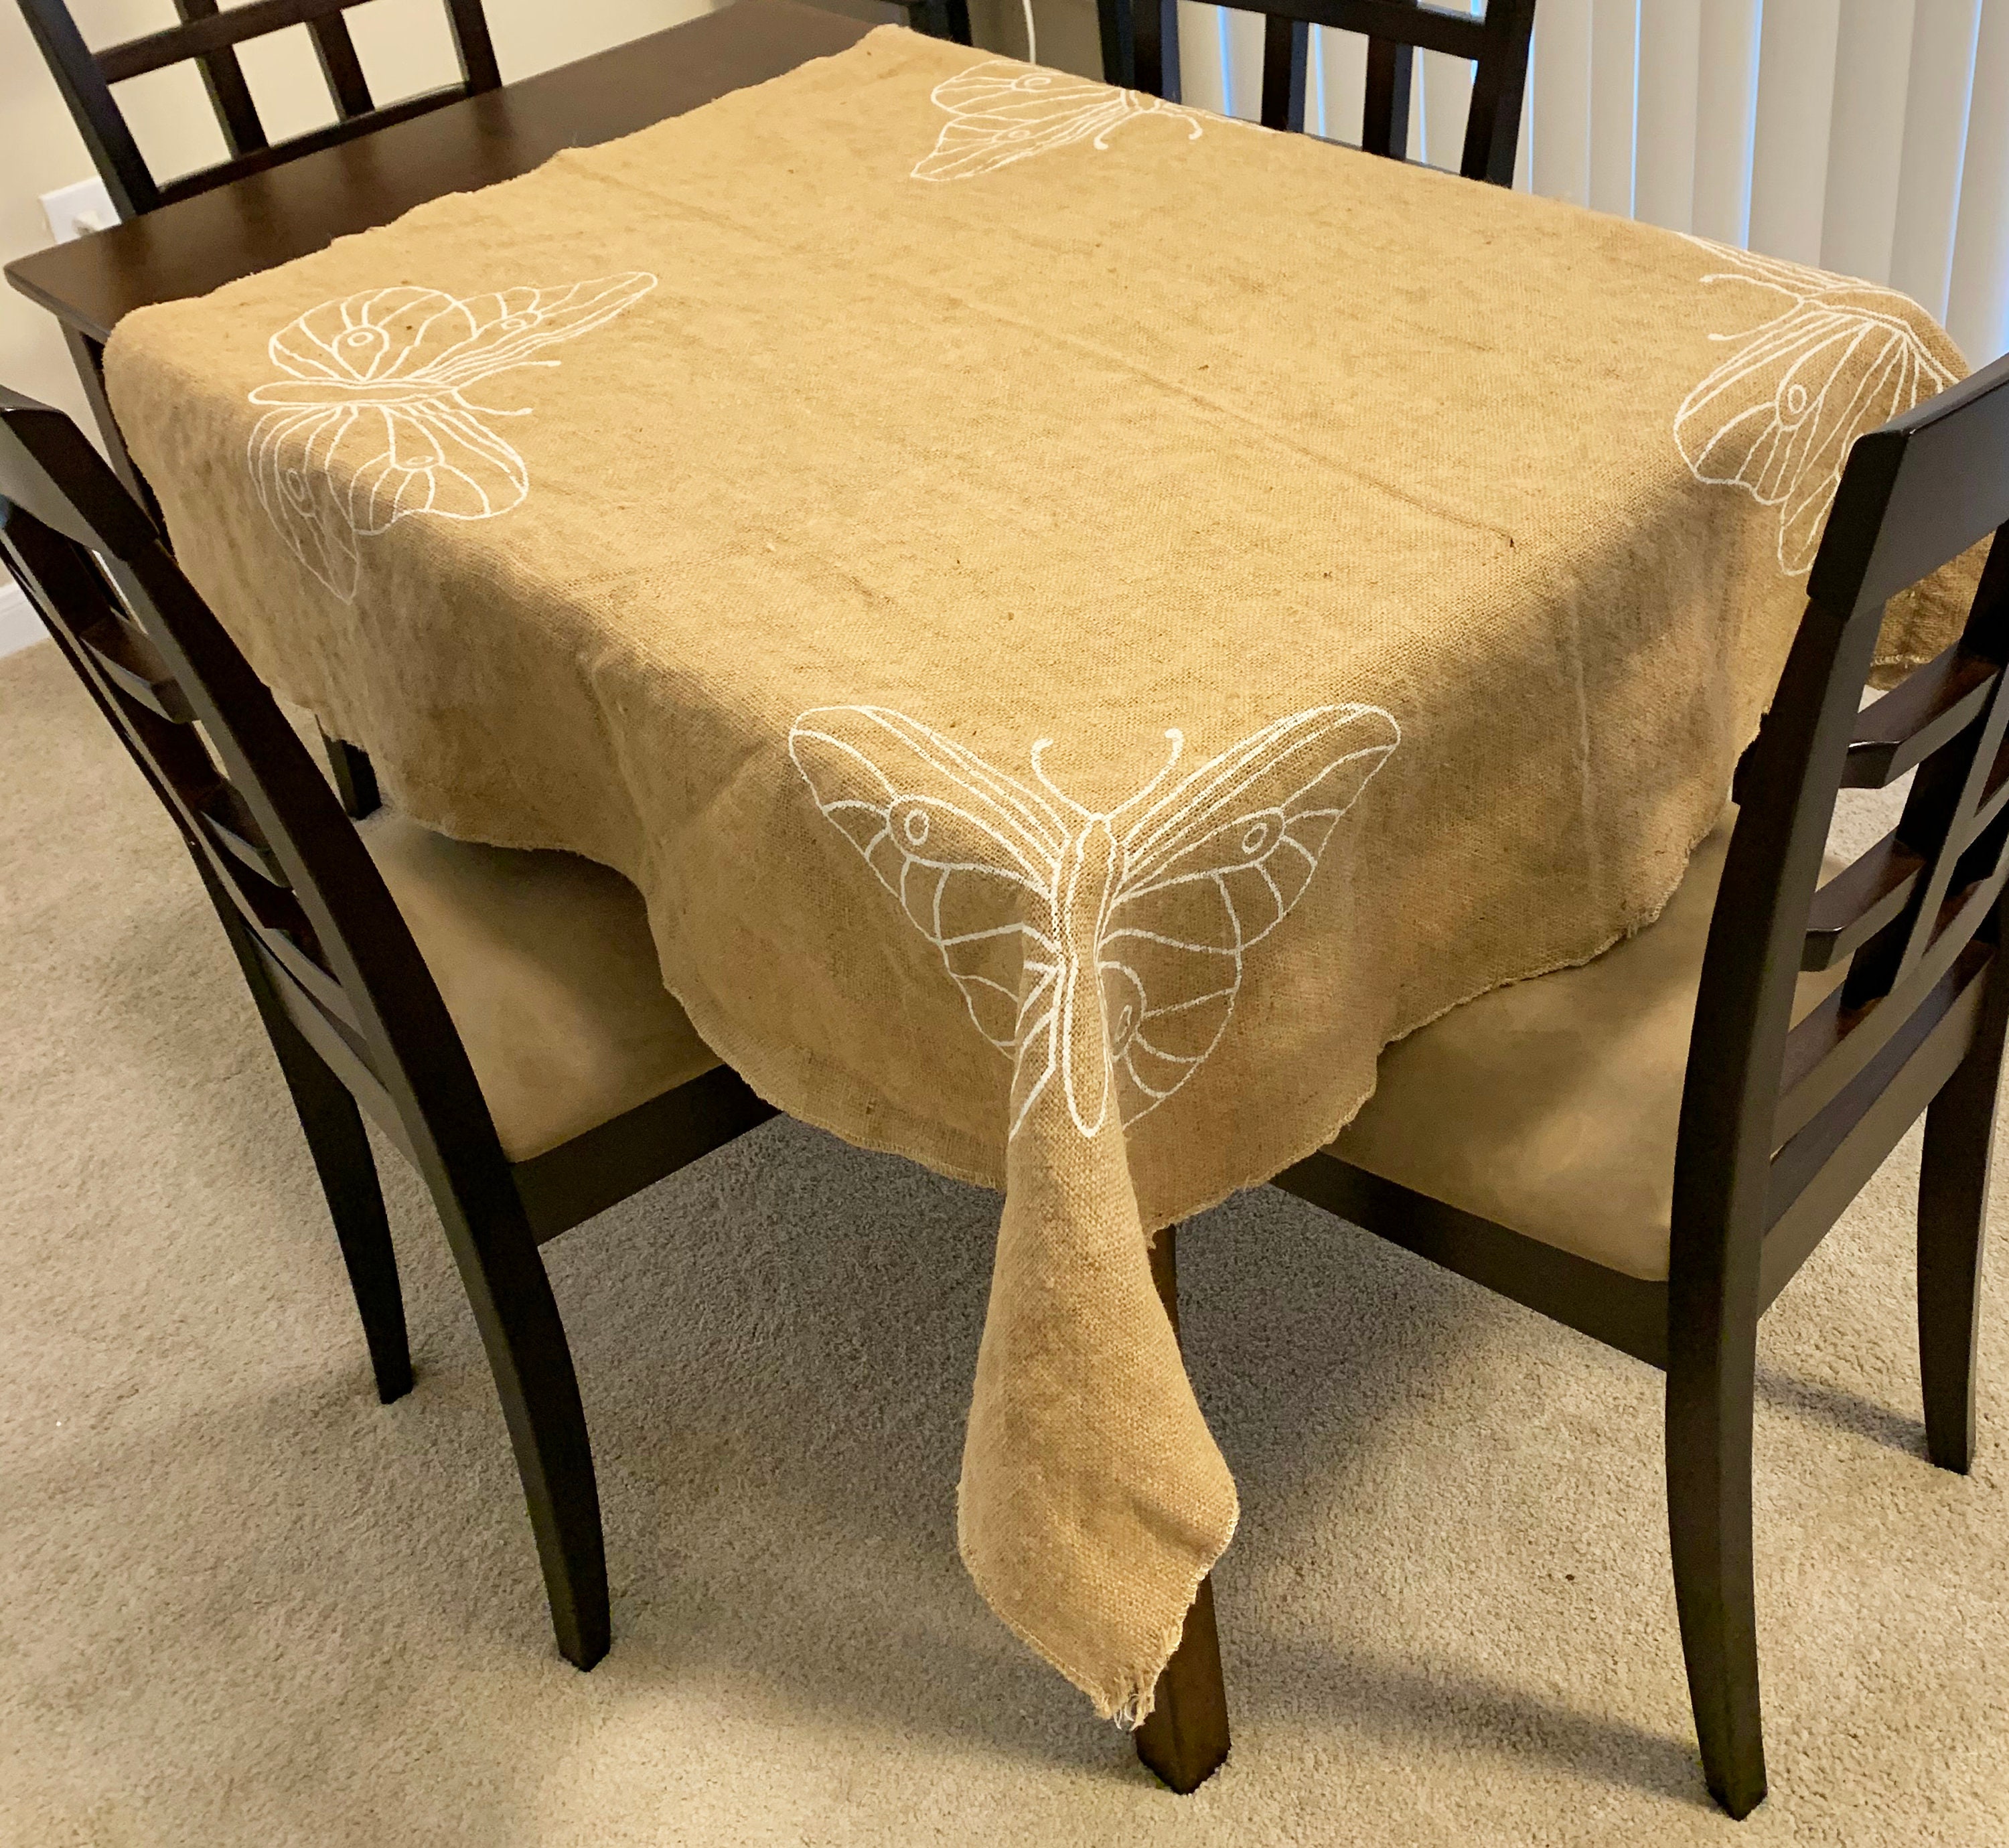 Runner, Burlap White Butterfly Runner, Toppers Jute Corner Natural - Rustic Runners, Party Square Table Burlap Table Color Tablecloth, Printed Etsy